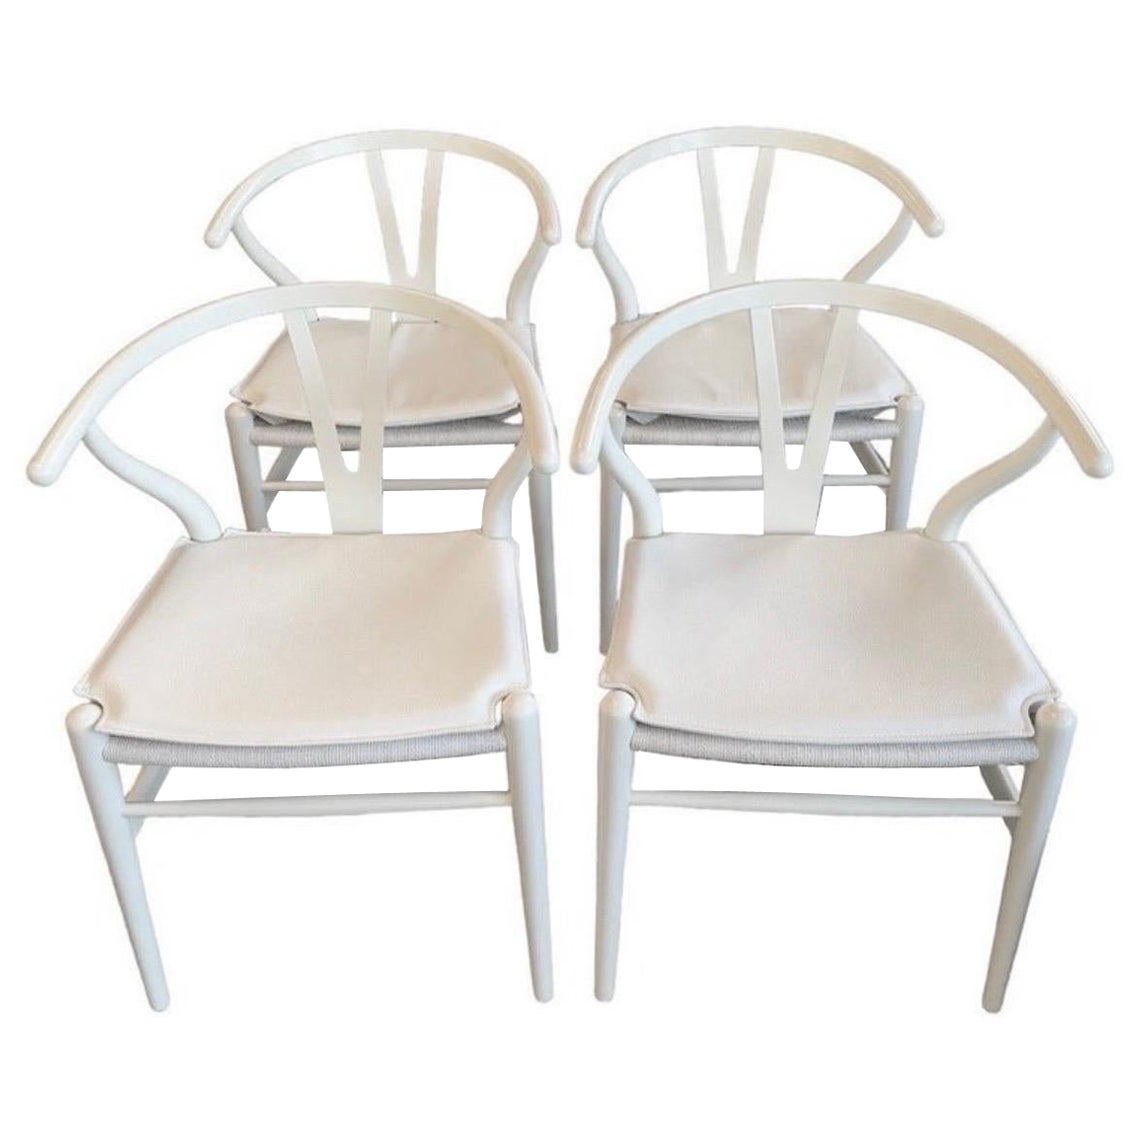 Set of 4 Carl Hansen & Son Wishbone Chairs in white lacquered finish